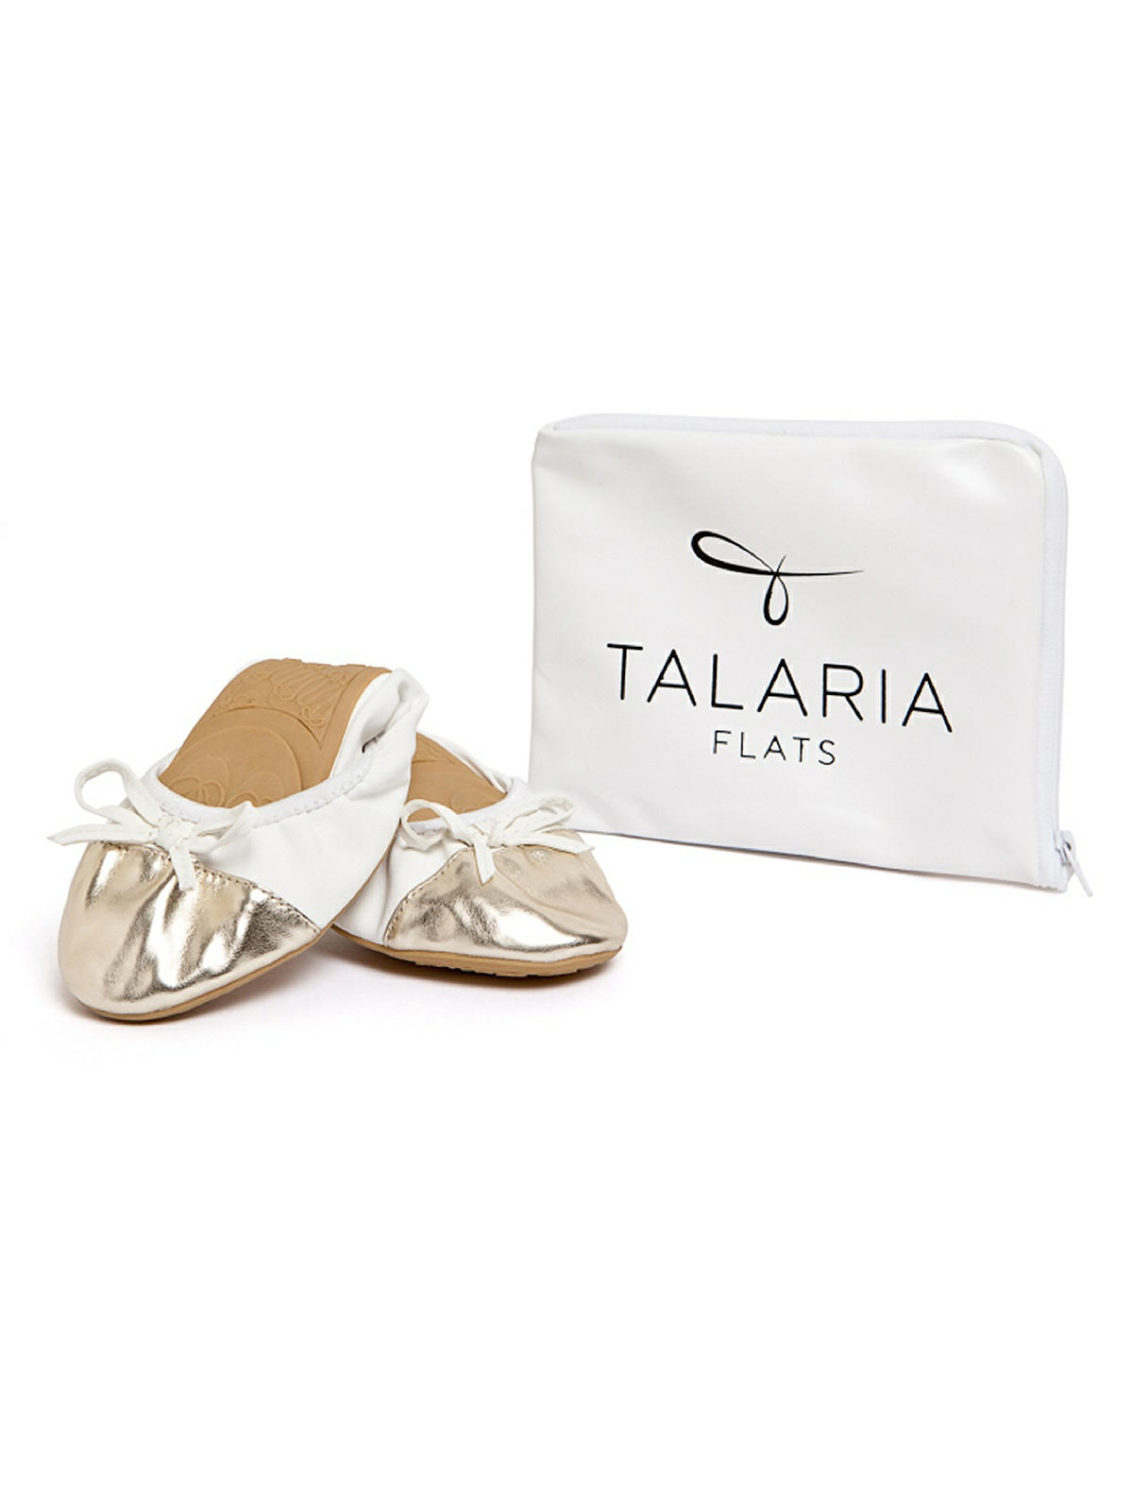 white and gold ballet flats for brides and bridesmaids